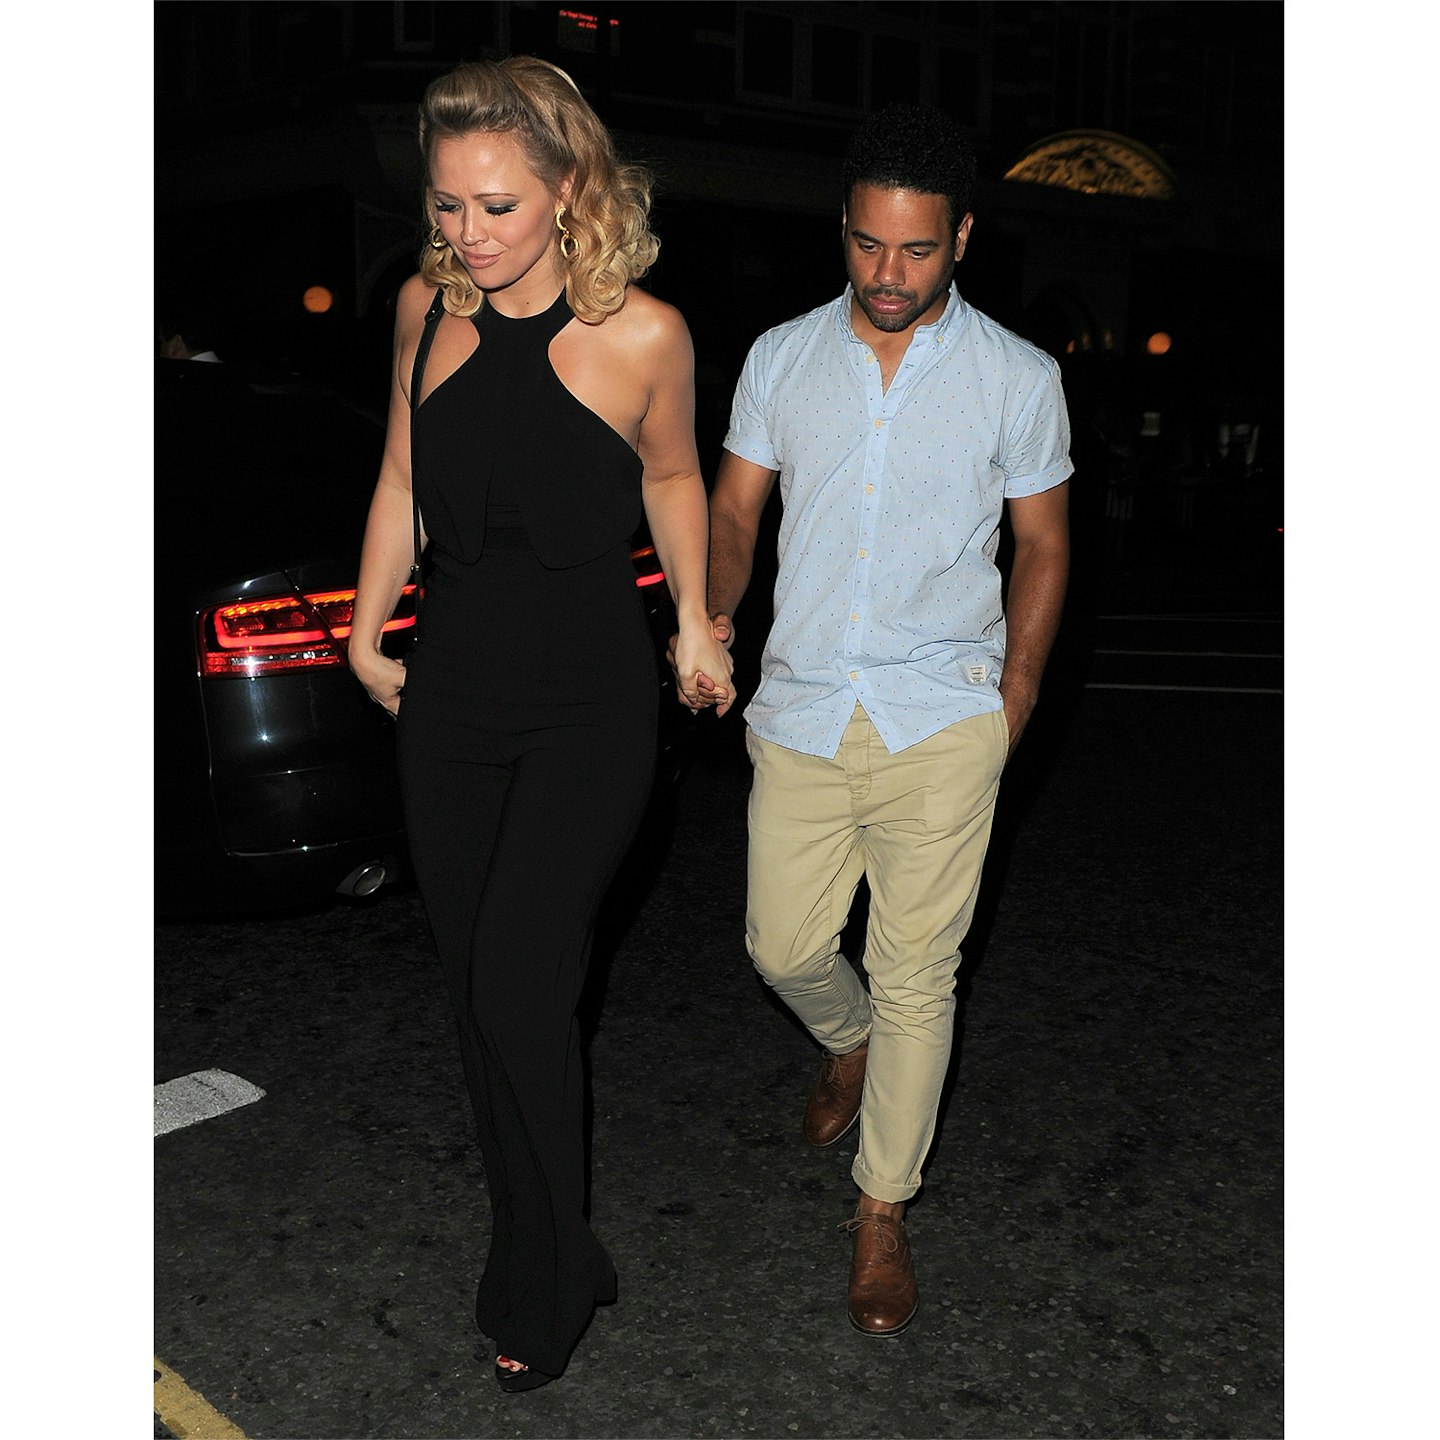 kimberley walsh and justin scott on night out